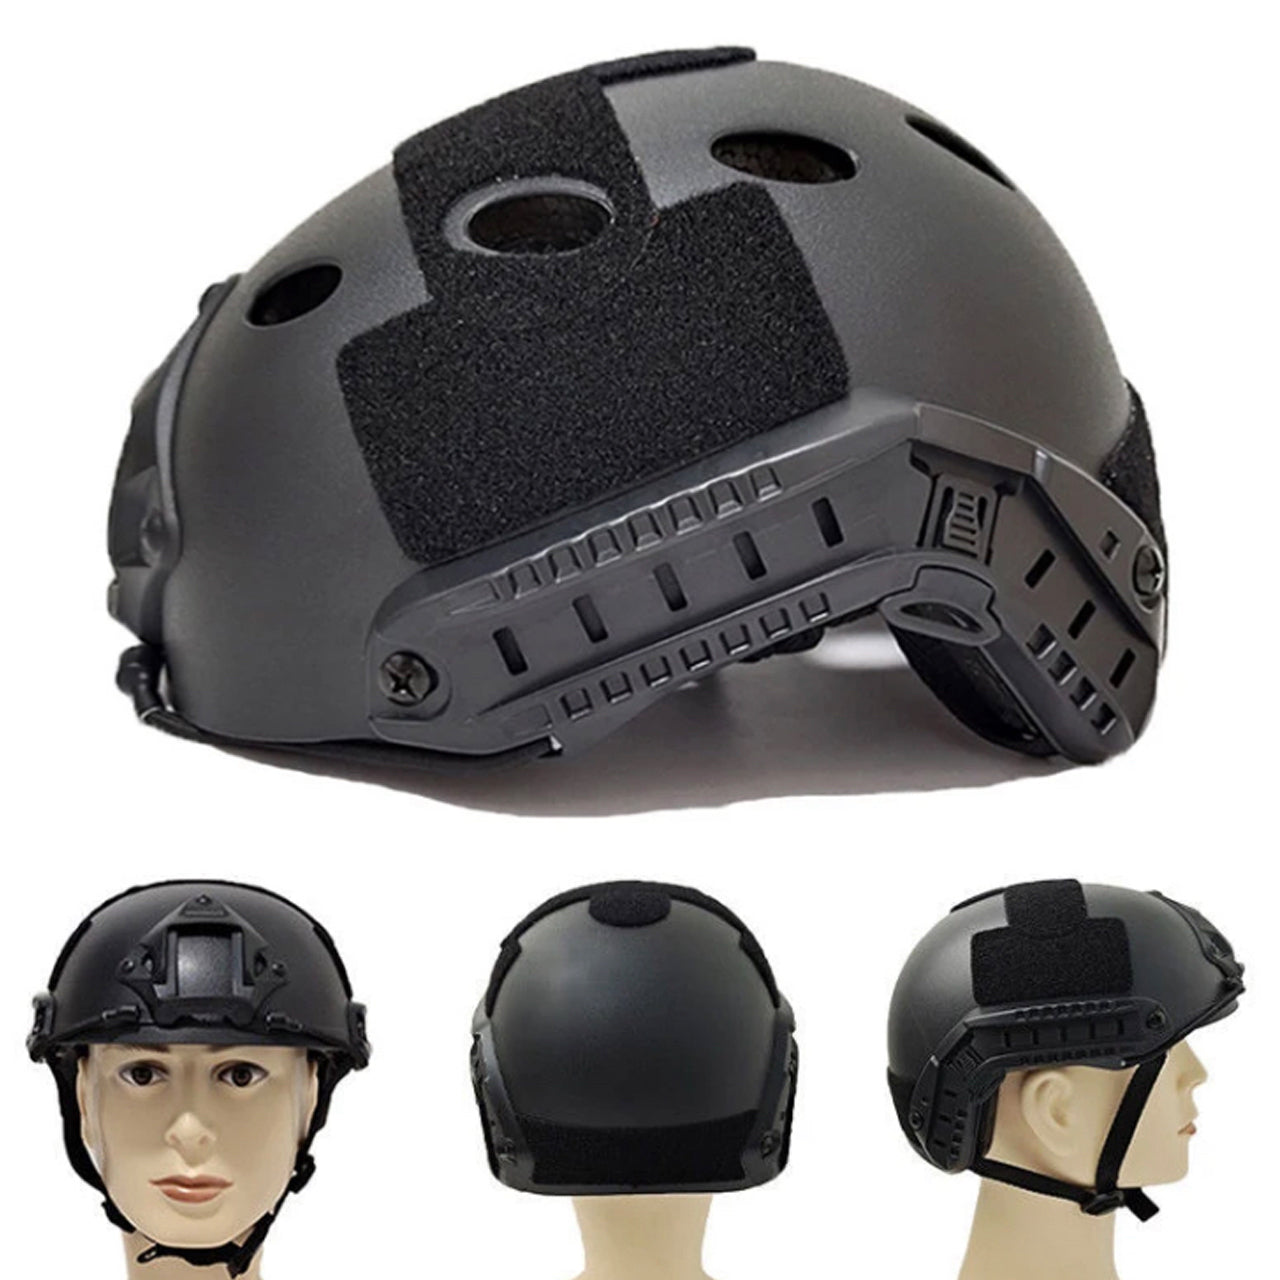 This Kids Tactical Helmet is perfect for the little ones! Its small size fits comfortably, and it even comes with a mount for a torch—making night adventures so much easier. www.defenceqstore.com.au